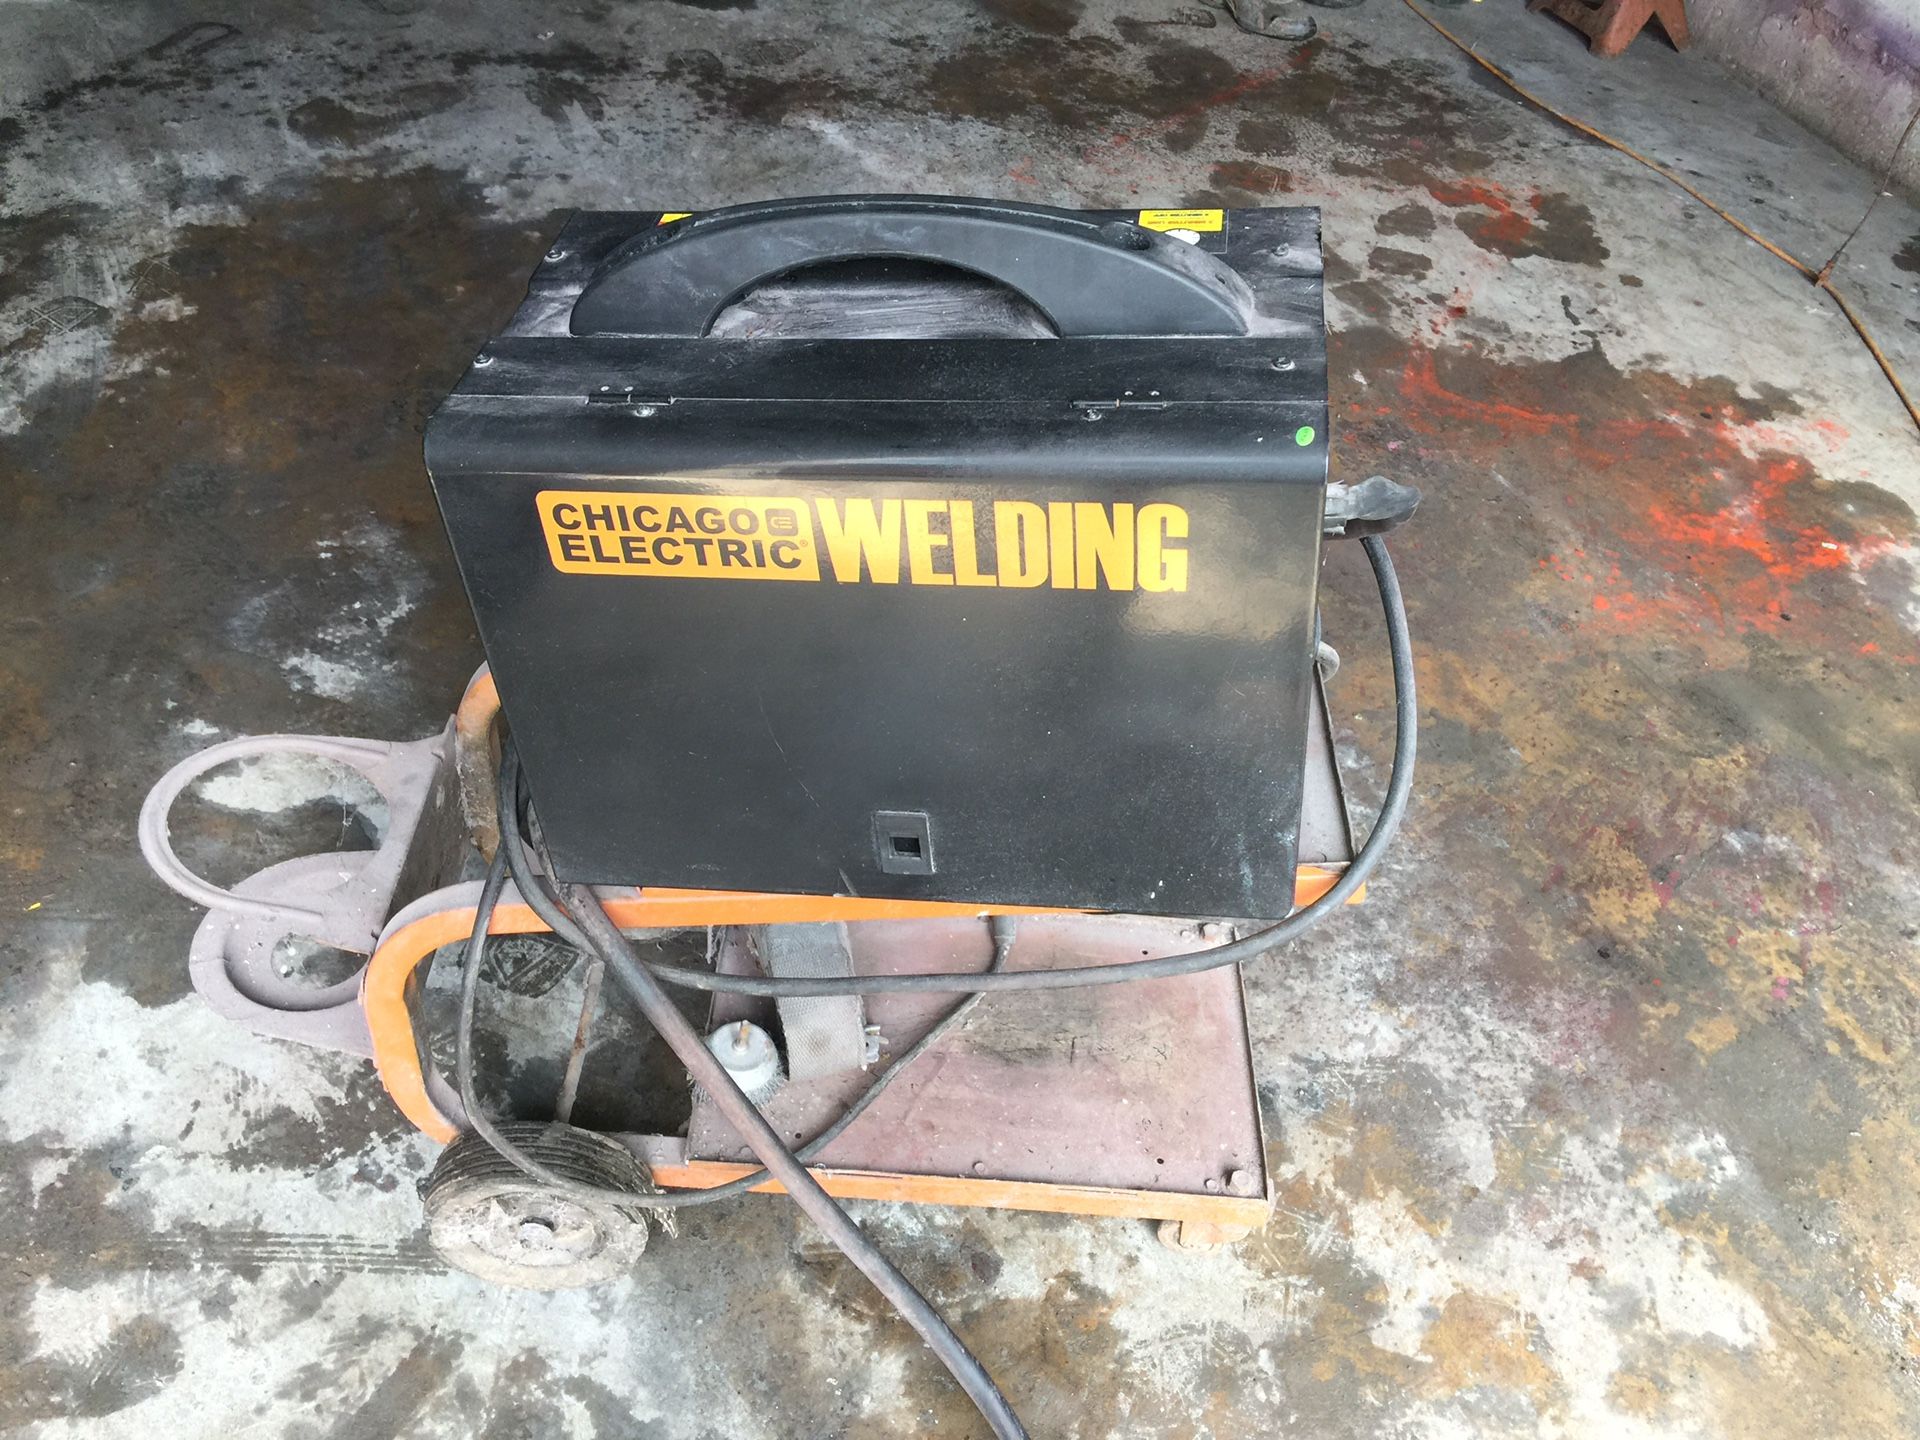 Chicago electric welding